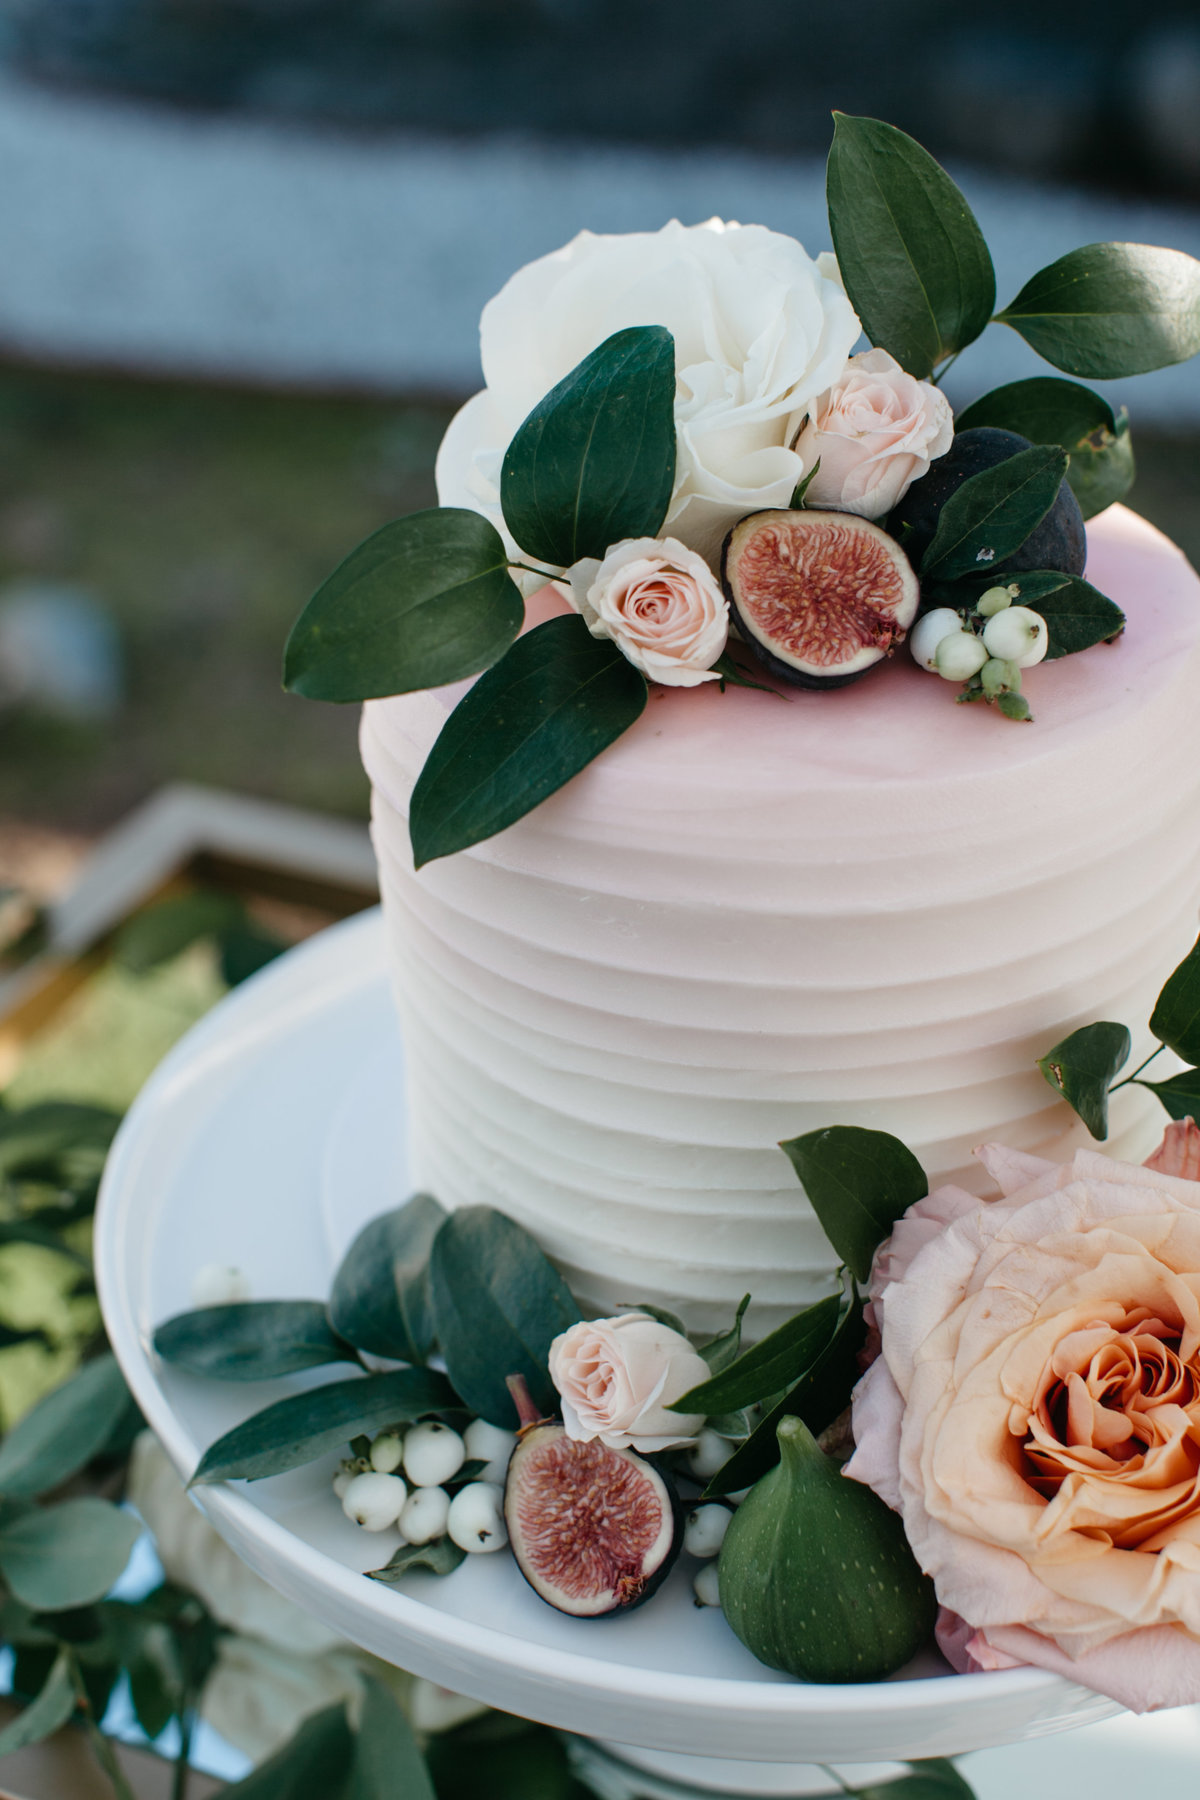 Romantic garden wedding cake decorated with blush shimmer roses and figs.